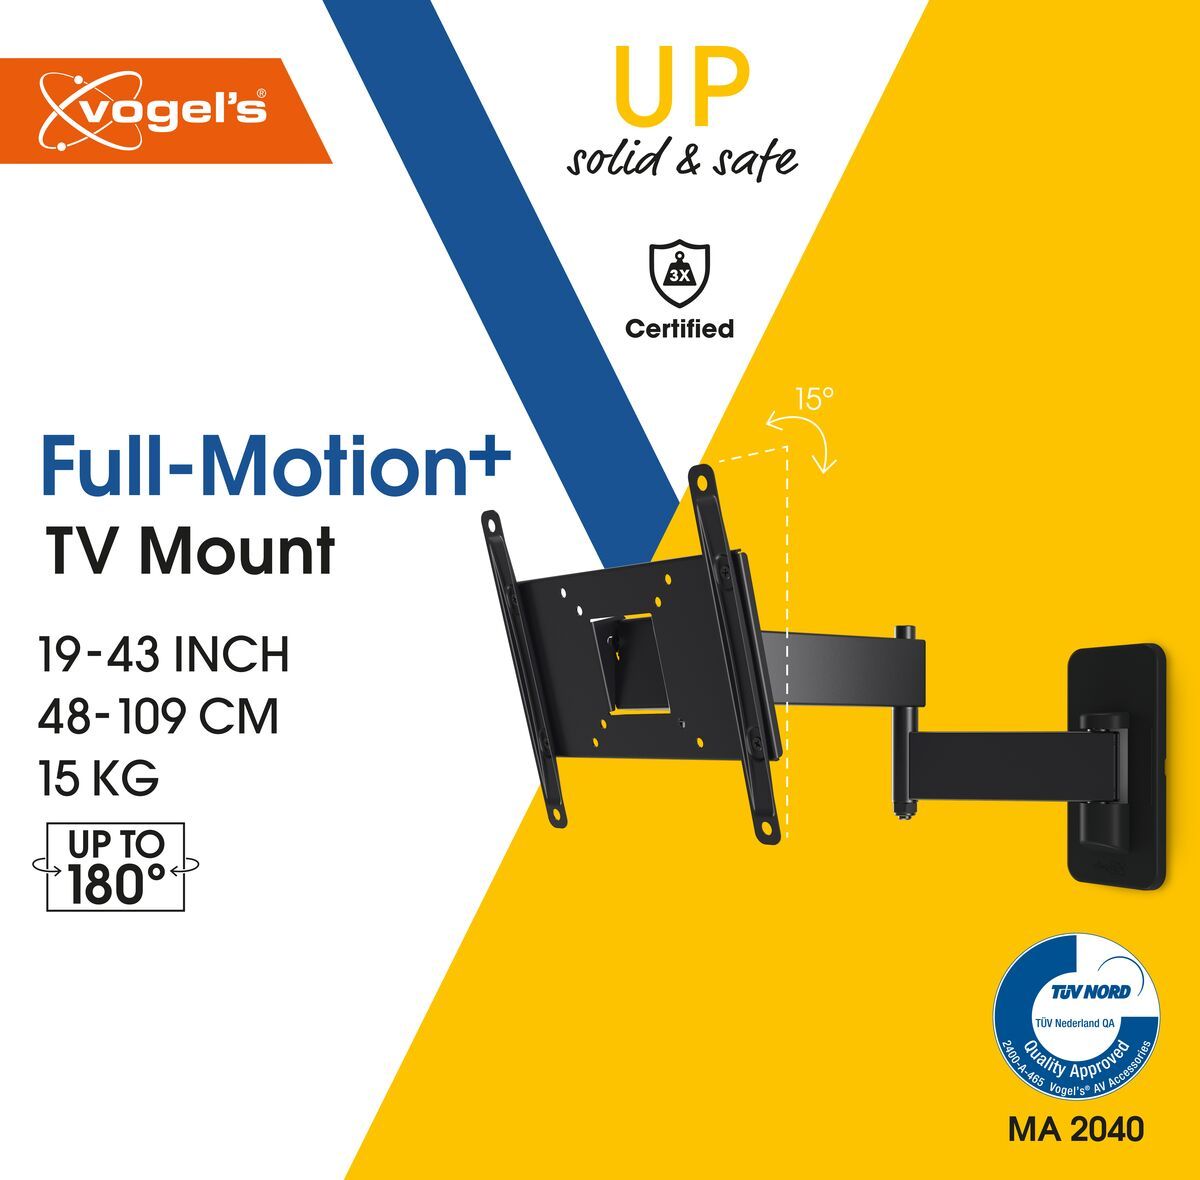 Vogel's MA 2040 Full-Motion TV Wall Mount - Suitable for 19 up to 43 inch TVs - Full motion (up to 180°) - Tilt up to 10° - Packaging front